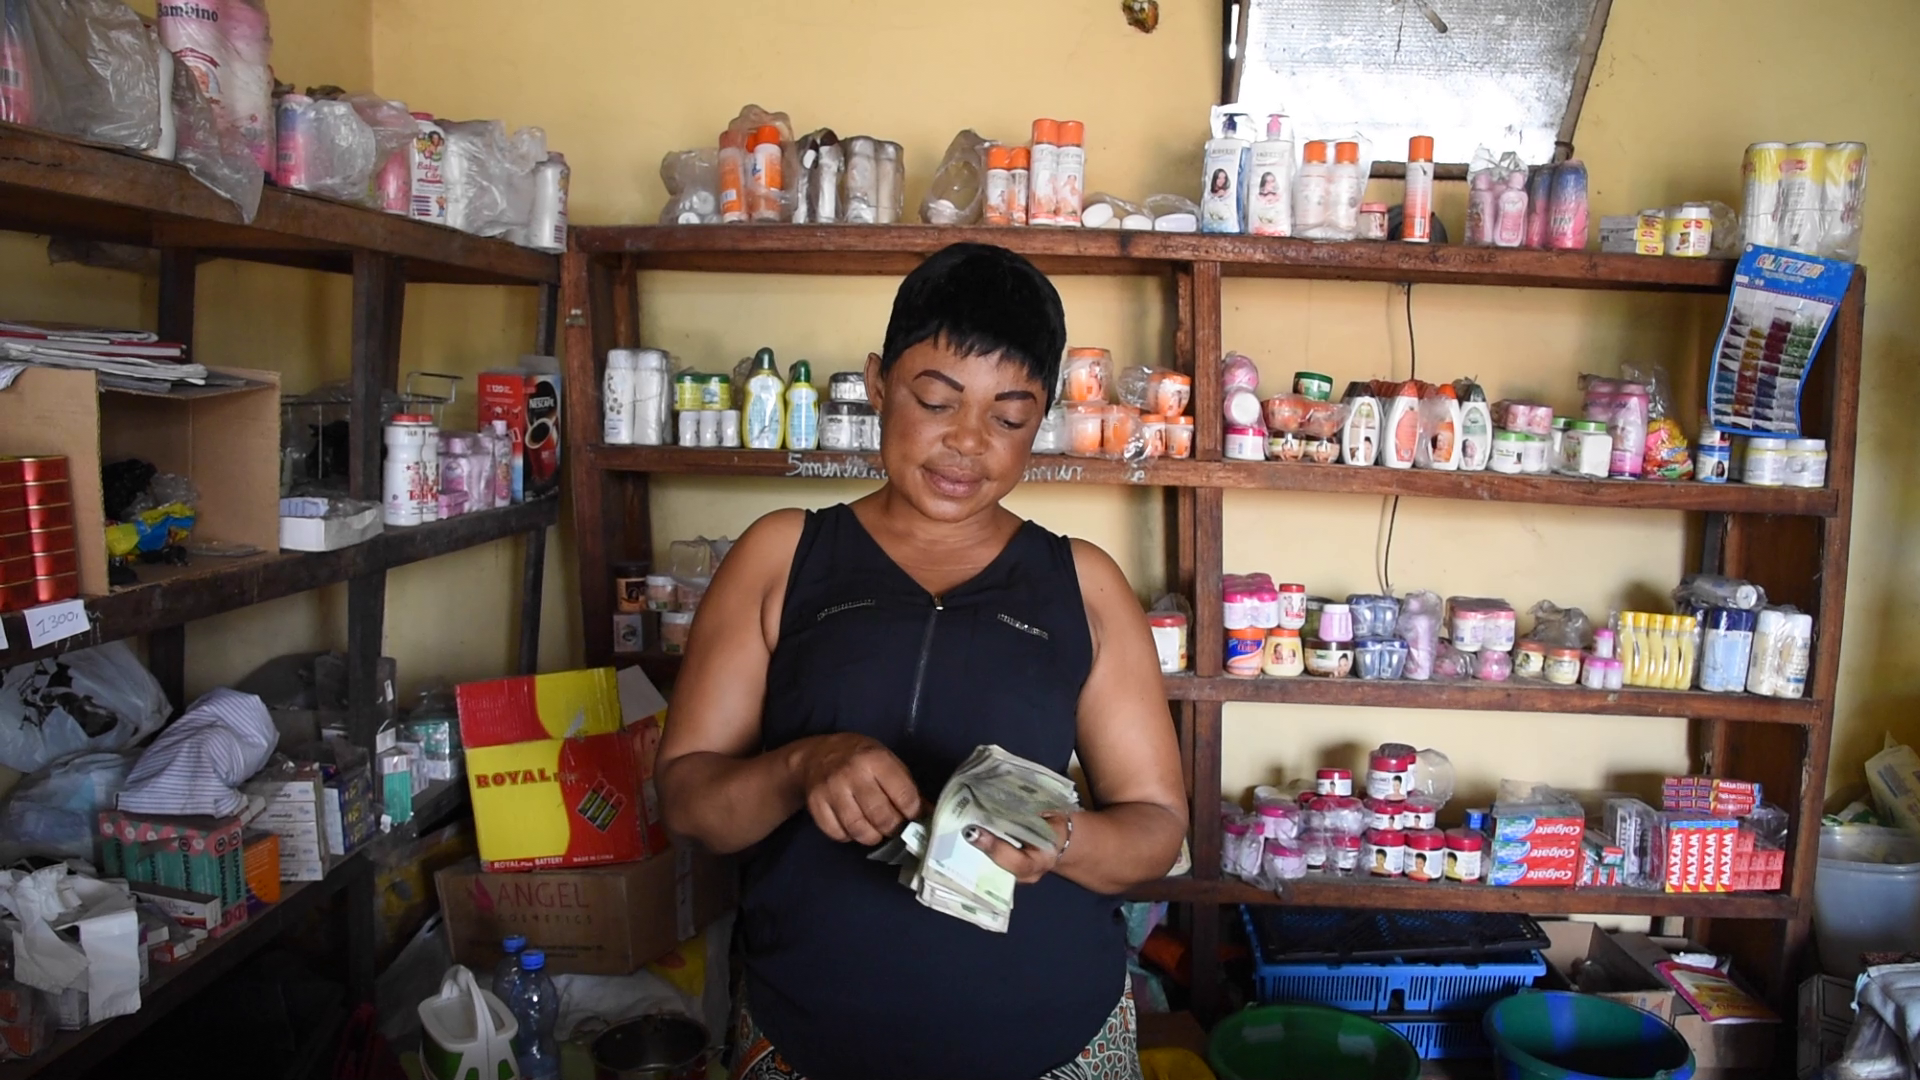 Innocente counting money in her shop